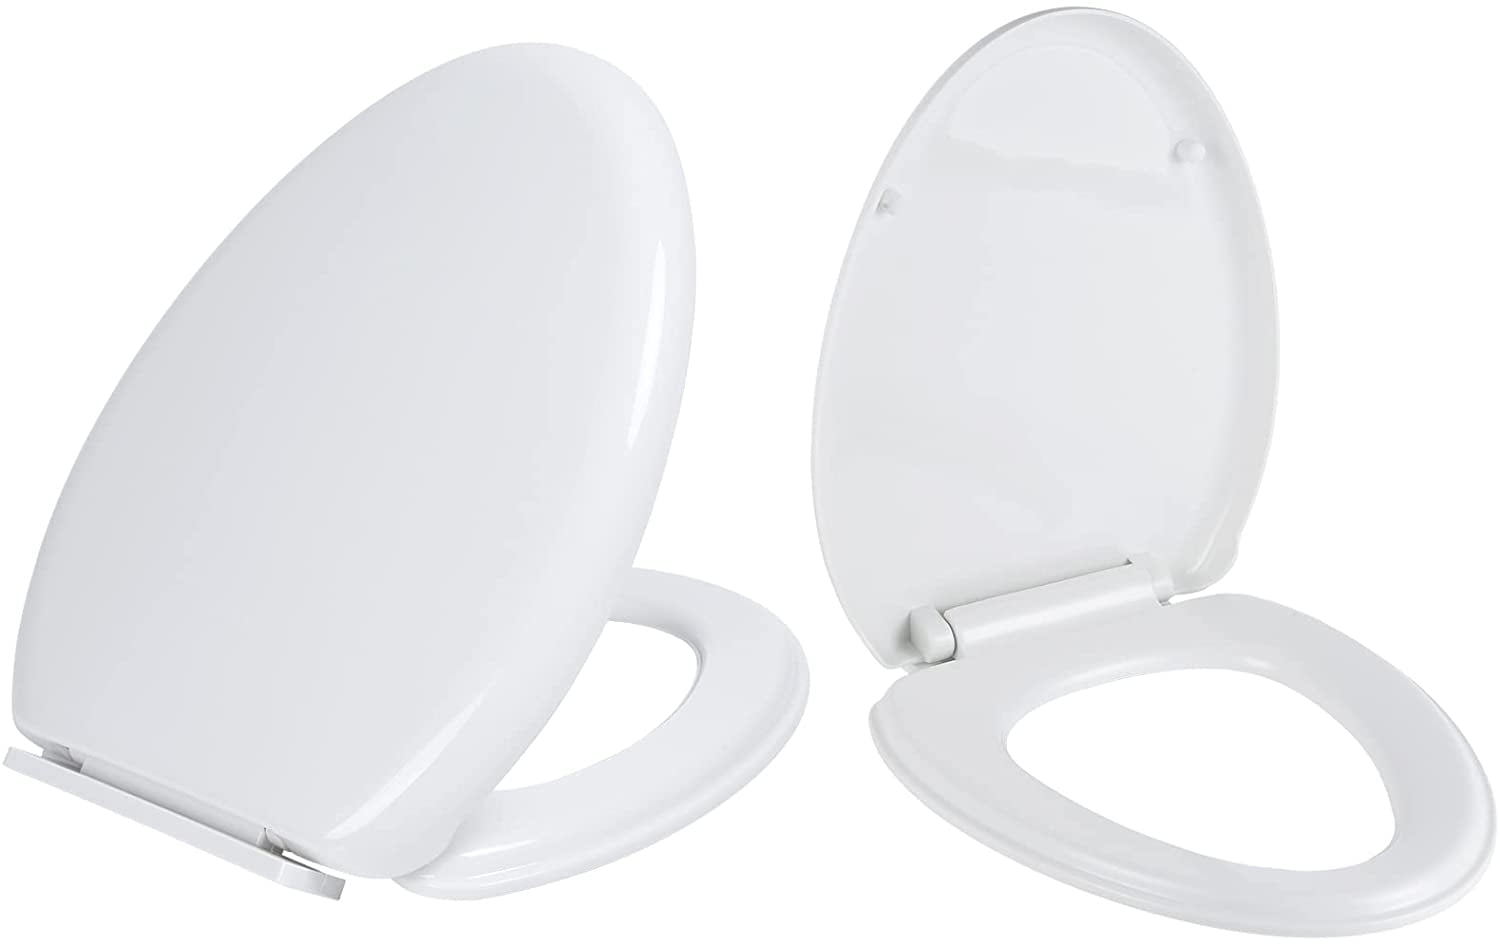 Round Toilet Seat Secure Chrome Hinges to Prevent Slamming In 3 Colors 